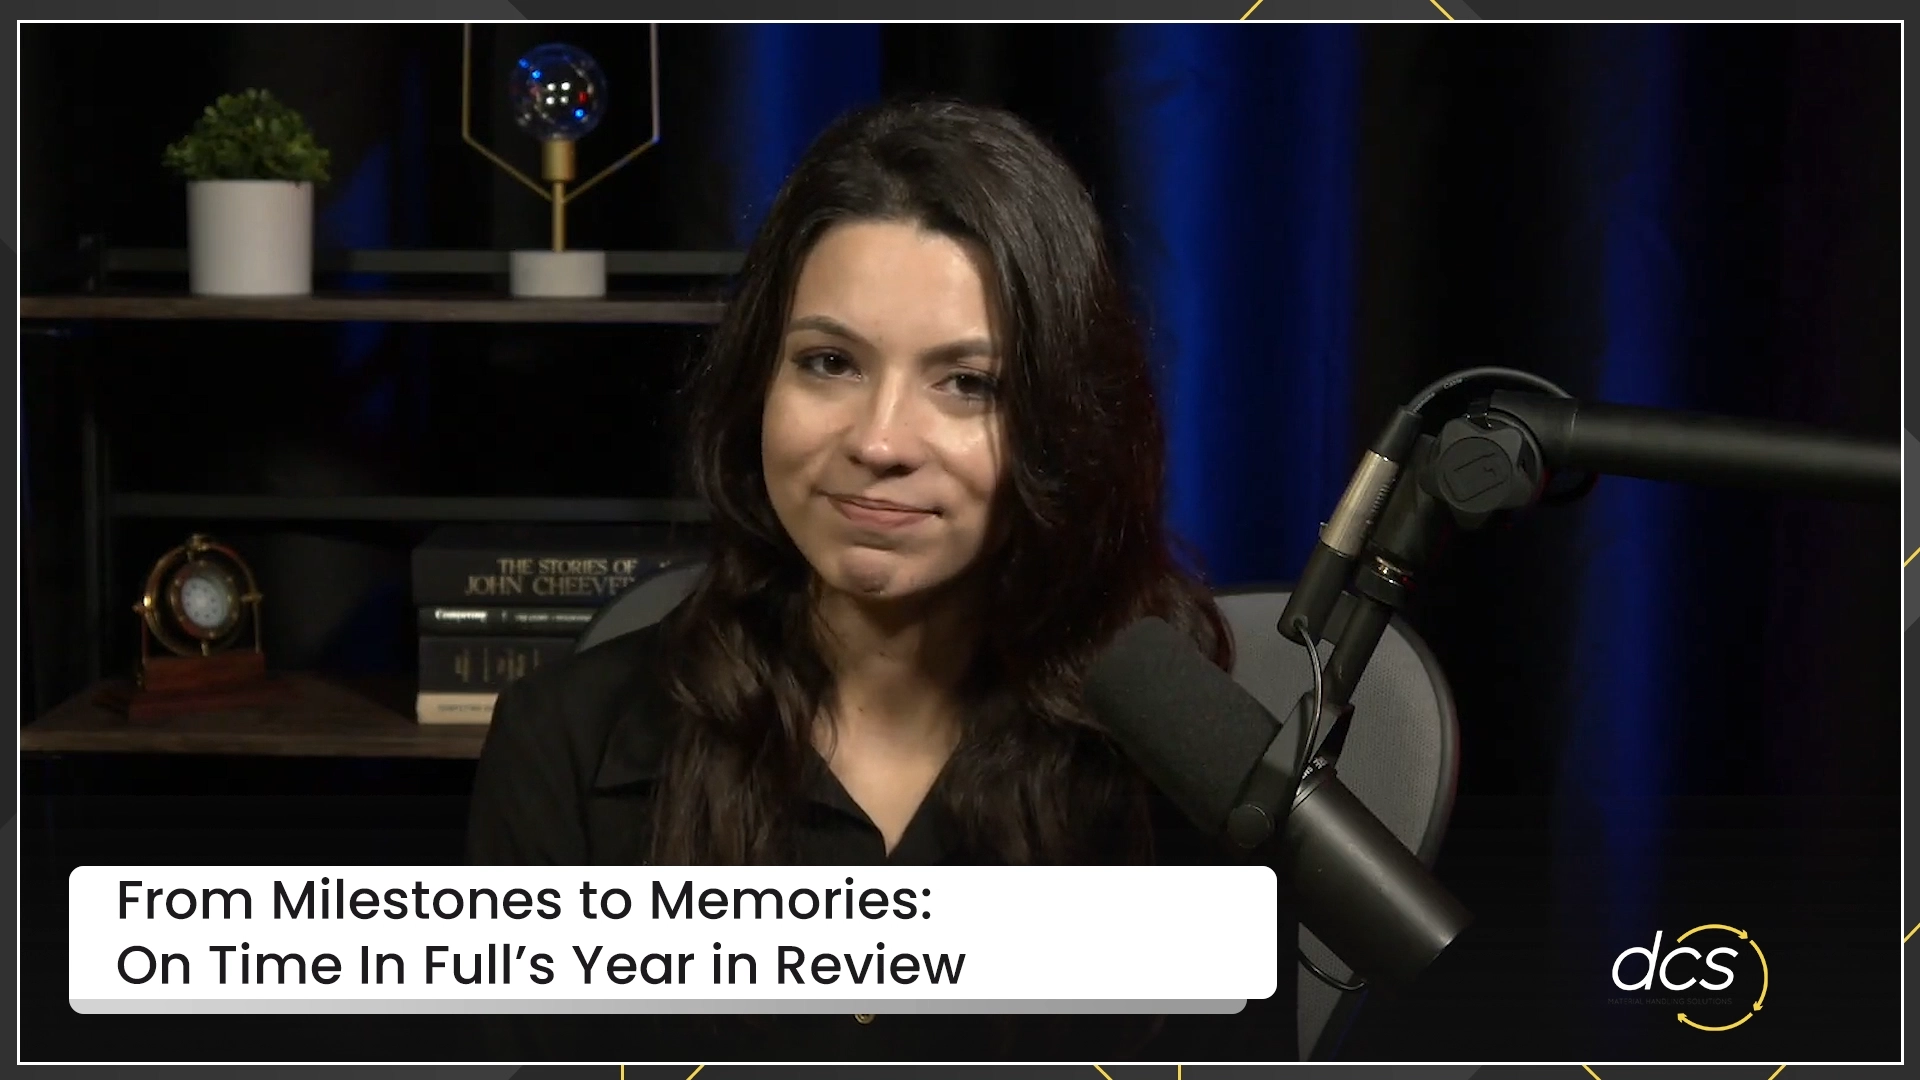 From Milestones to Memories: On Time In Full’s Year in Review